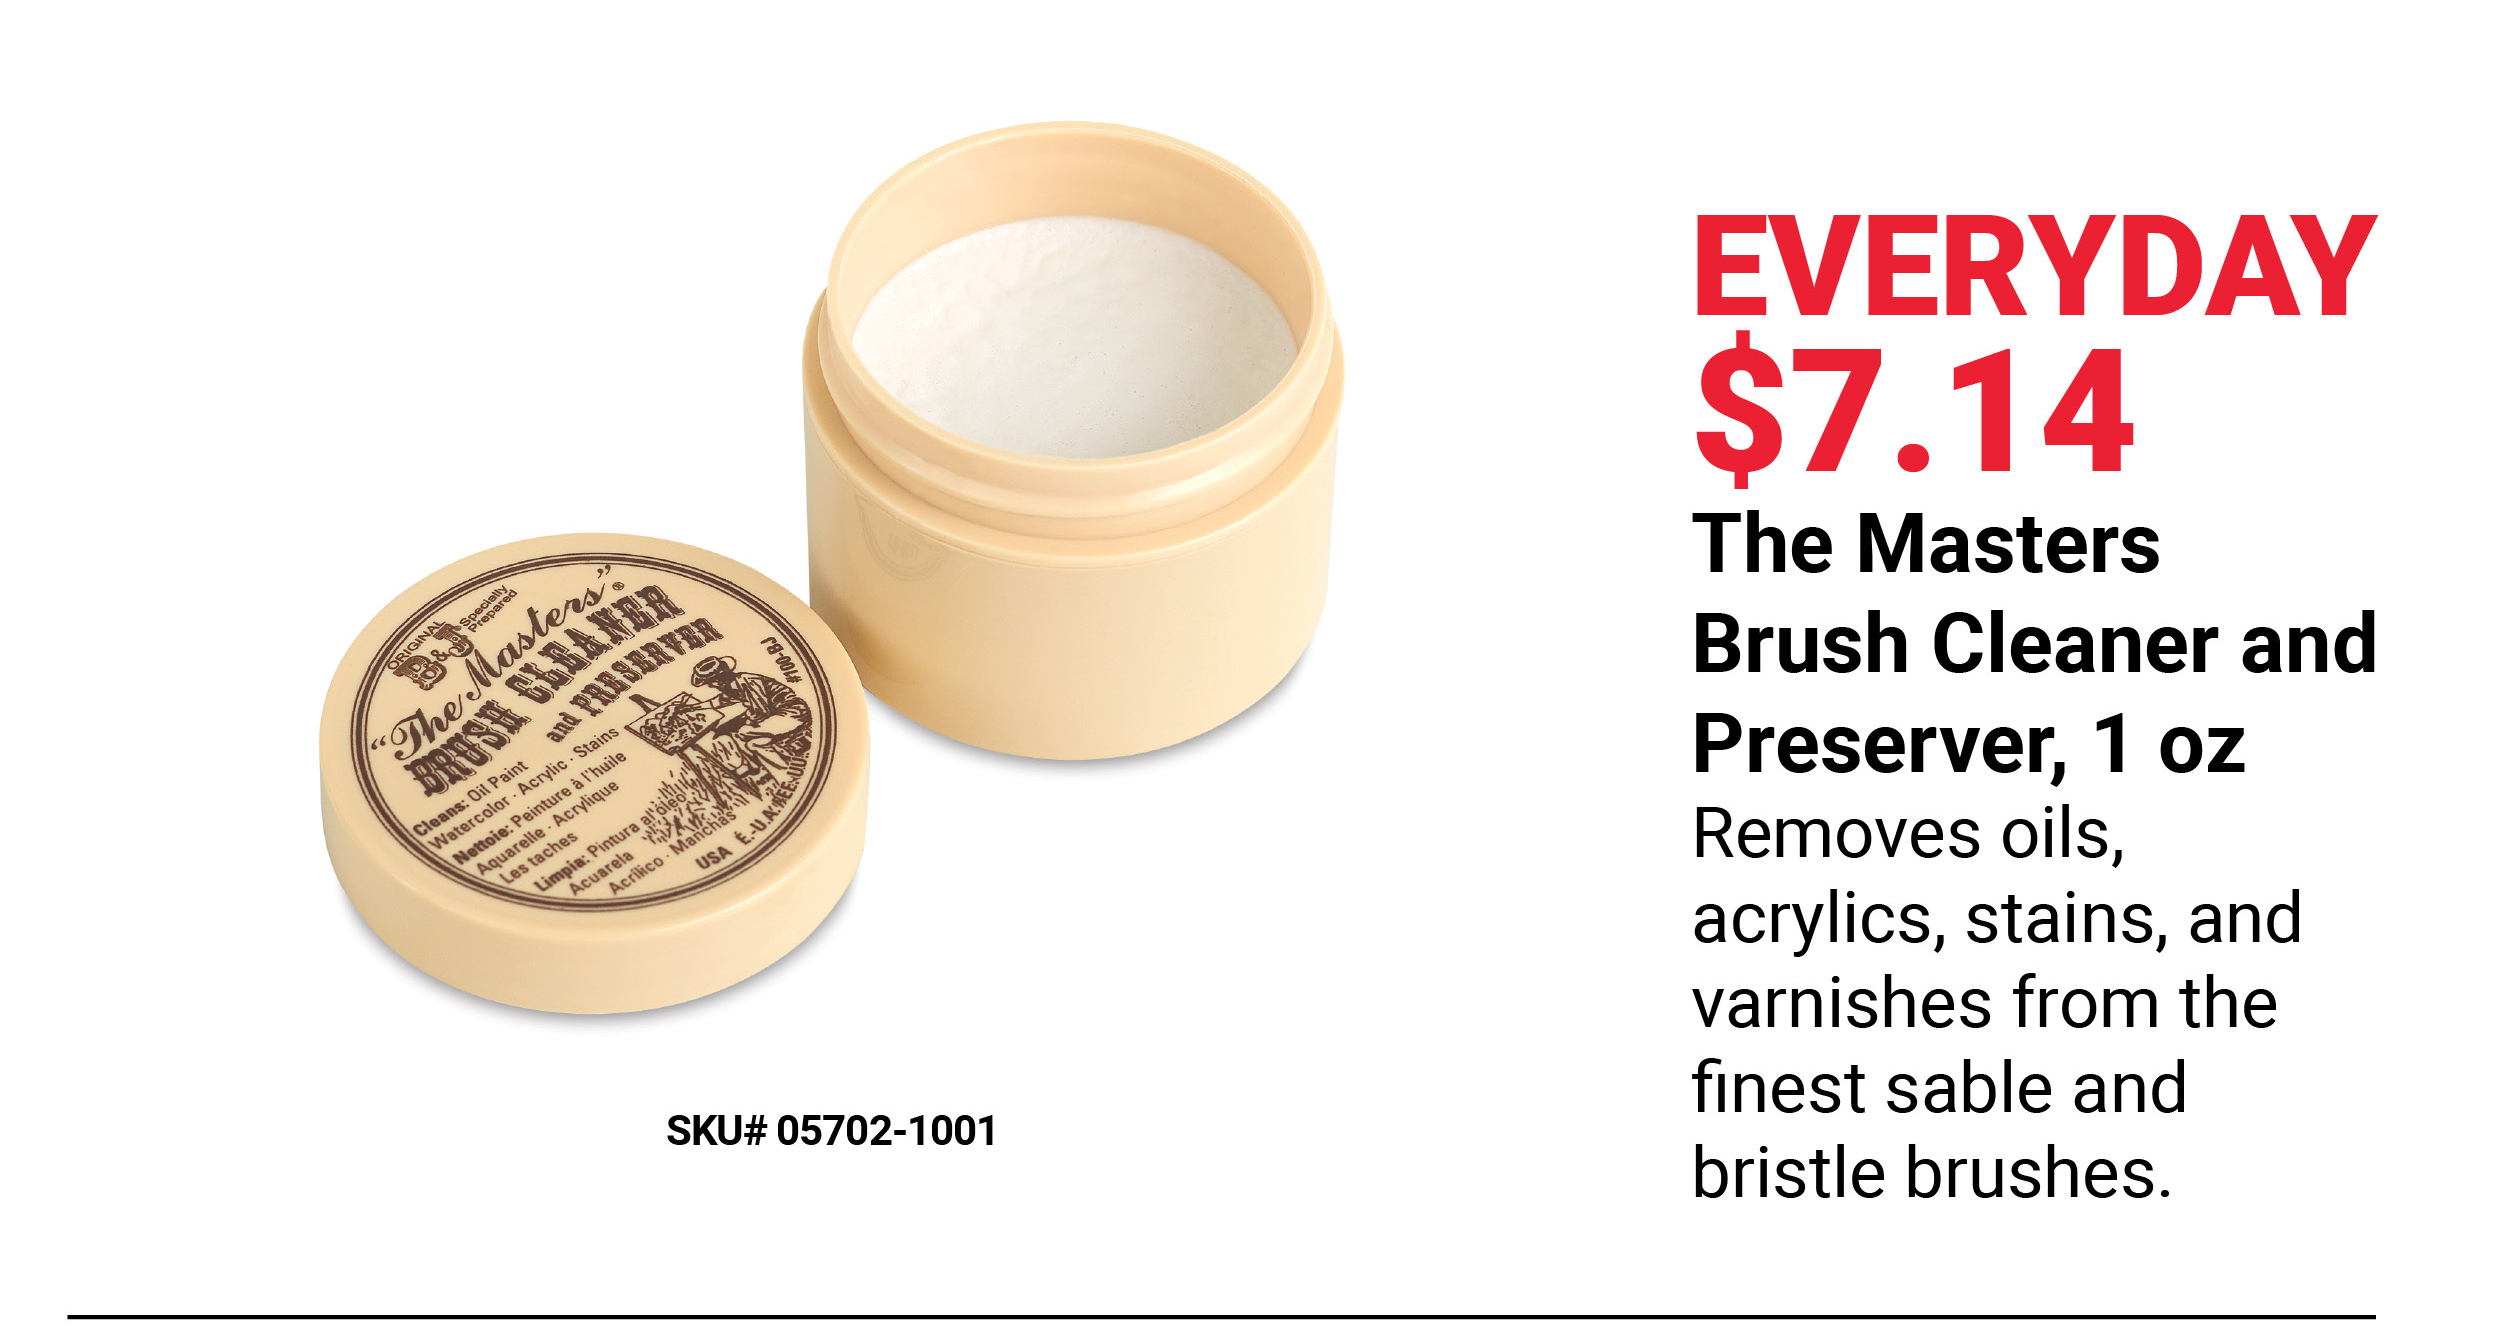 The Masters Brush Cleaner and Preserver, 1 oz Everyday $7.14